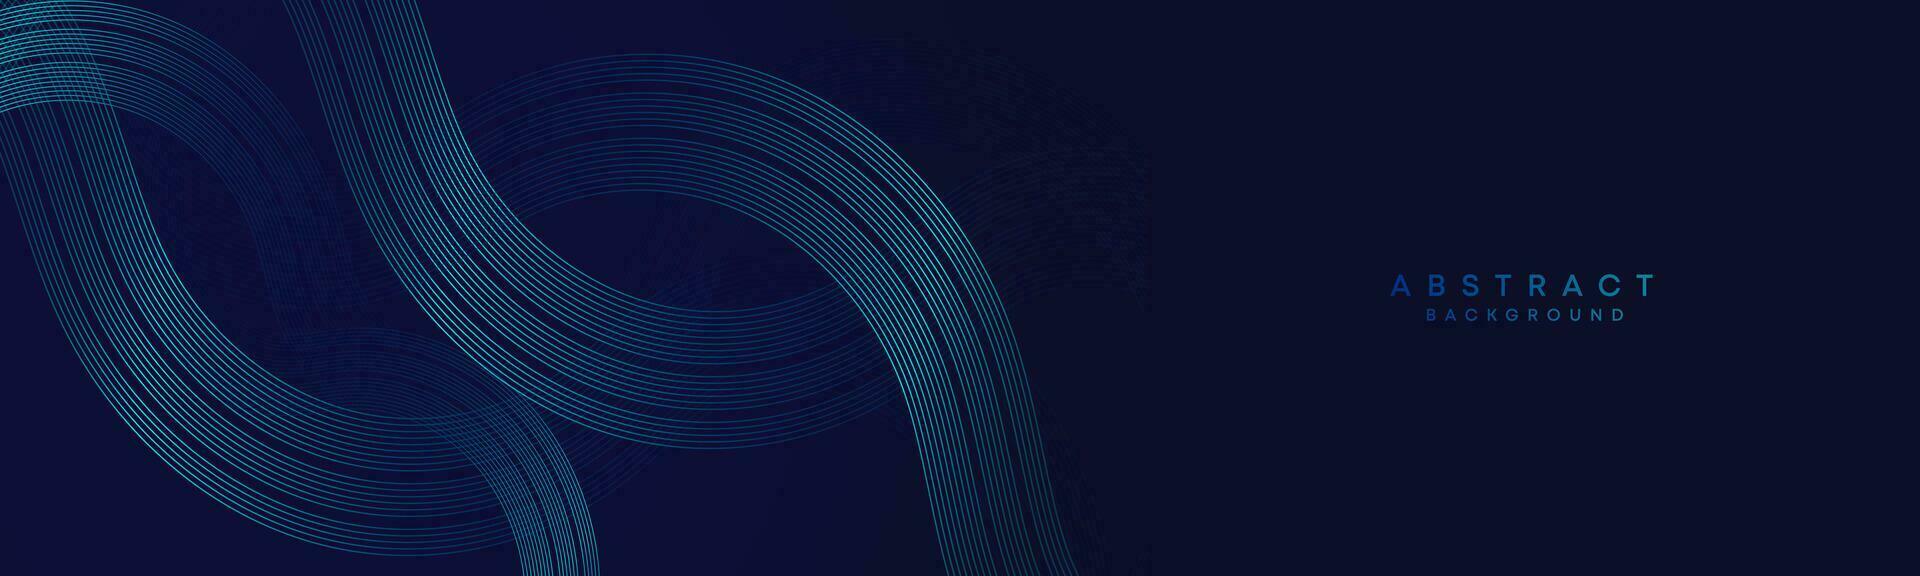 Abstract Dark Blue Waving circles lines Technology Background. Modern gradient with glowing lines shiny geometric shape and diagonal, for brochure, cover, poster, banner, website, header vector